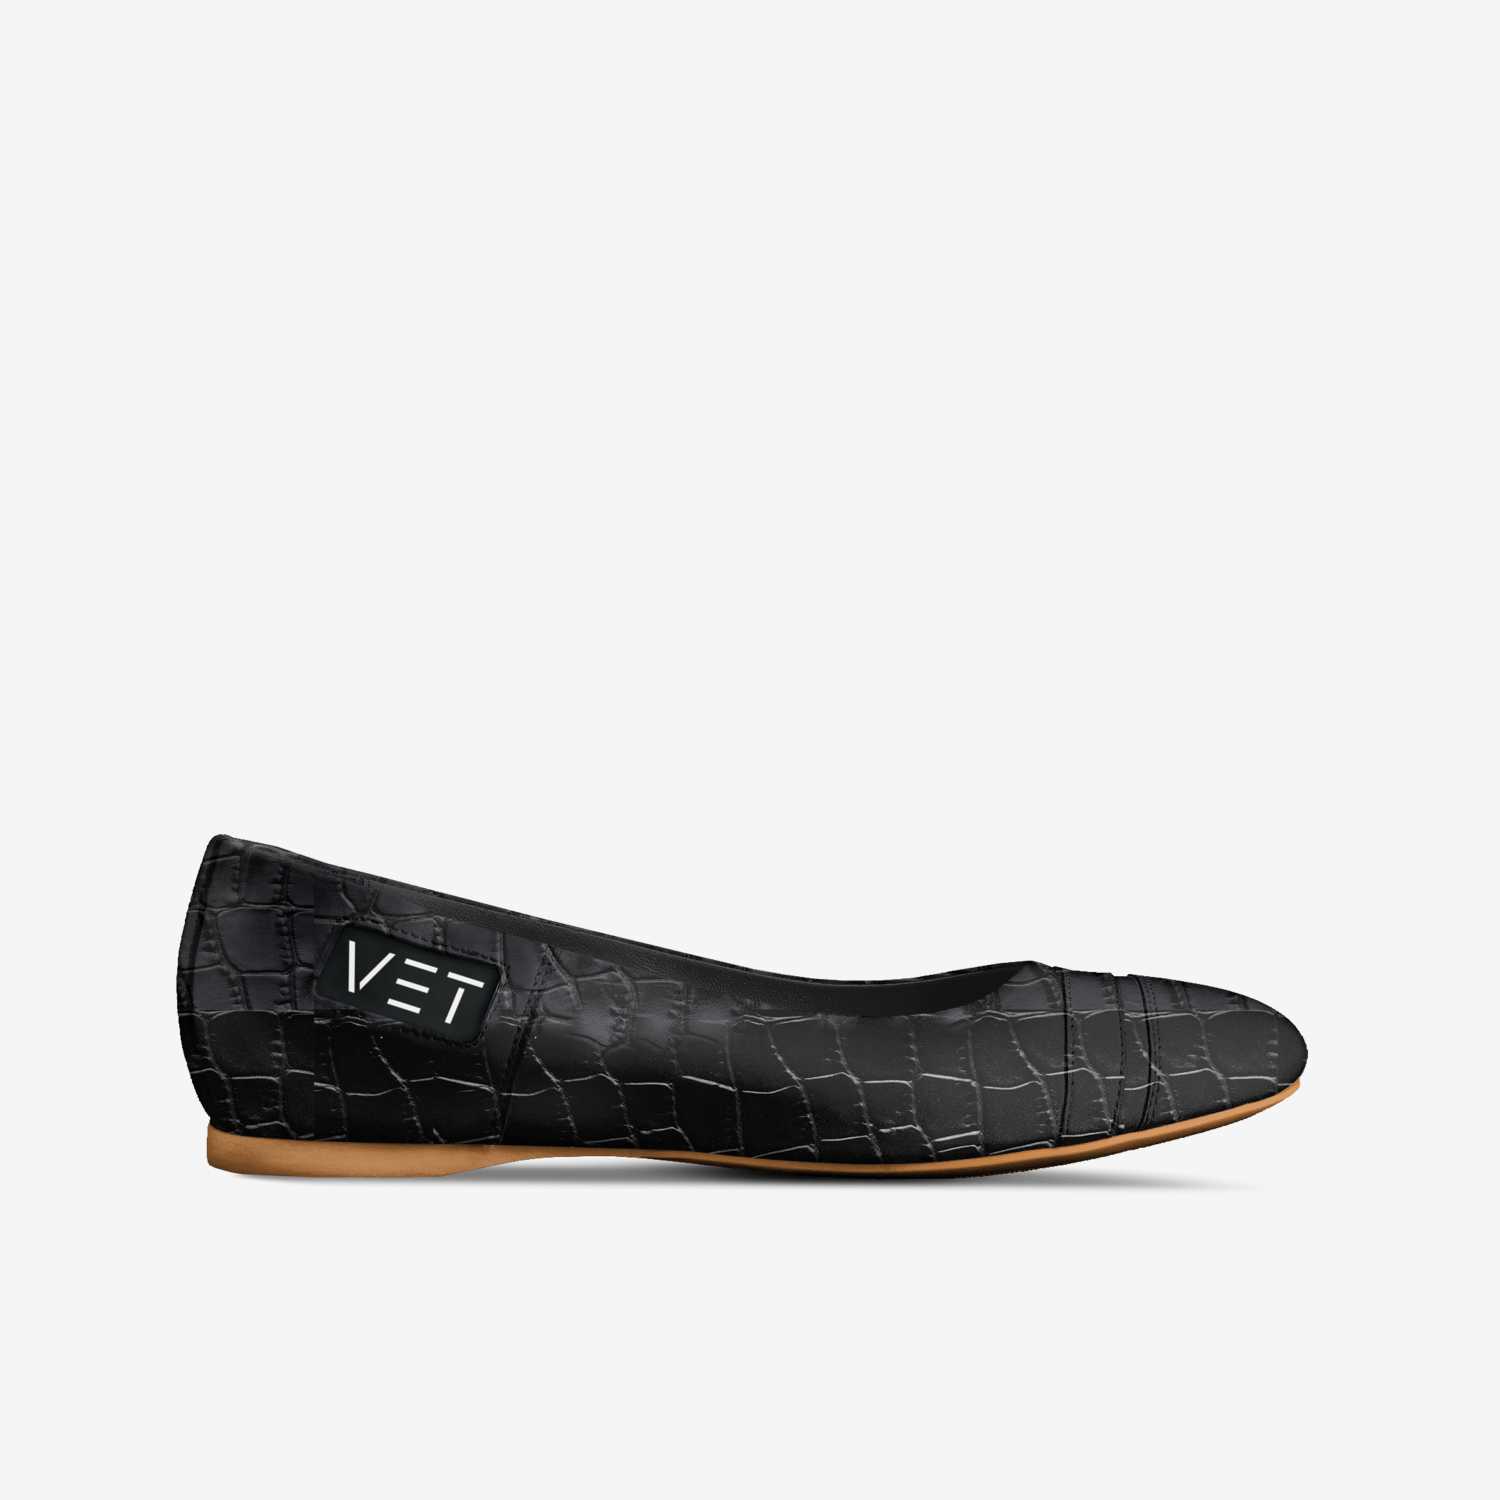 VETFAB custom made in Italy shoes by Desi Shedrick | Side view